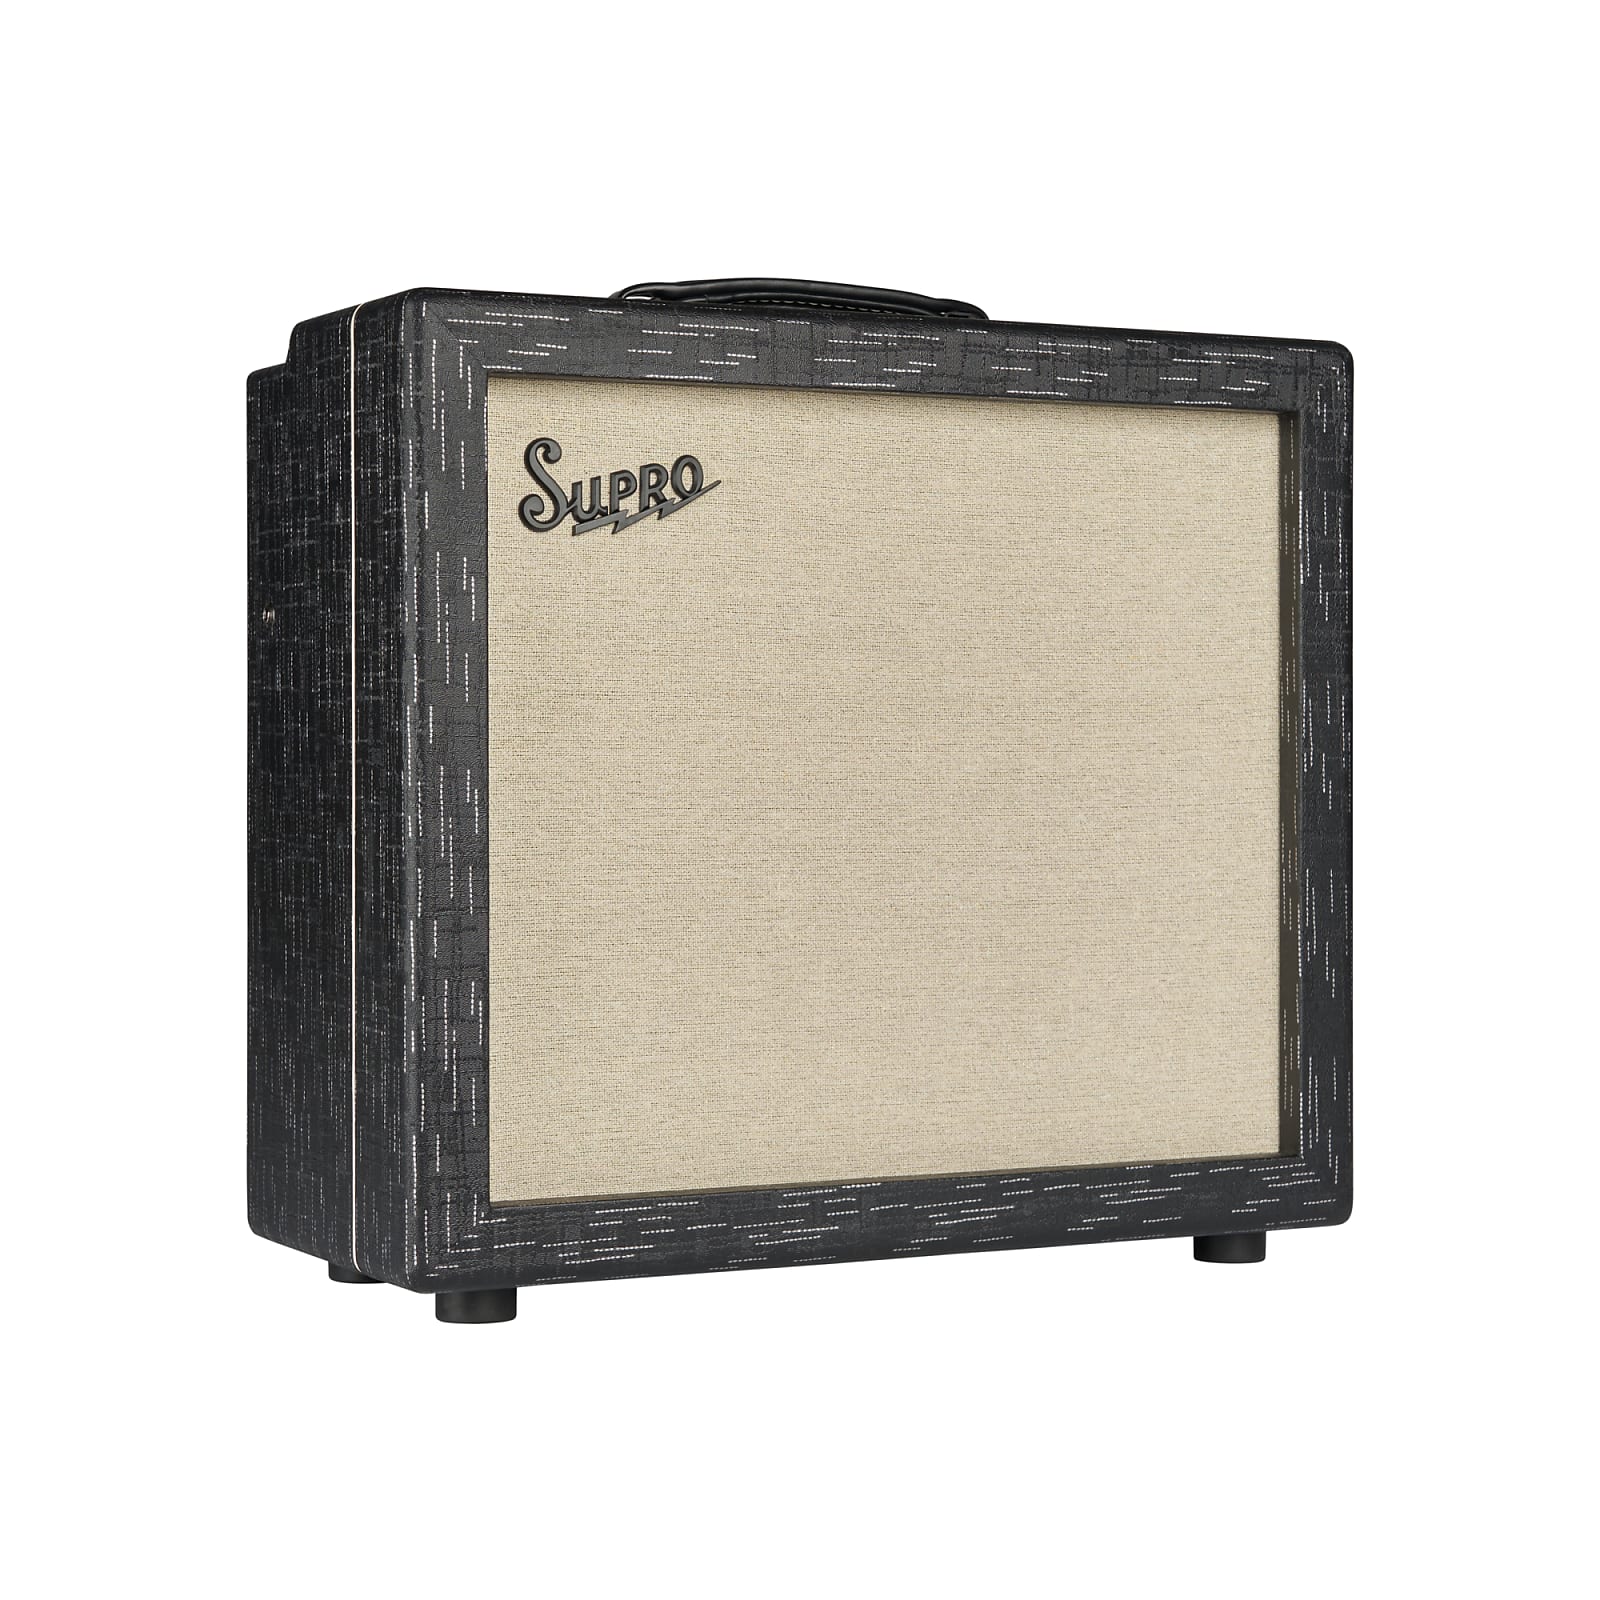 Supro 1932r Royale 112 Combo 50w 1x12 - Electric guitar combo amp - Variation 1